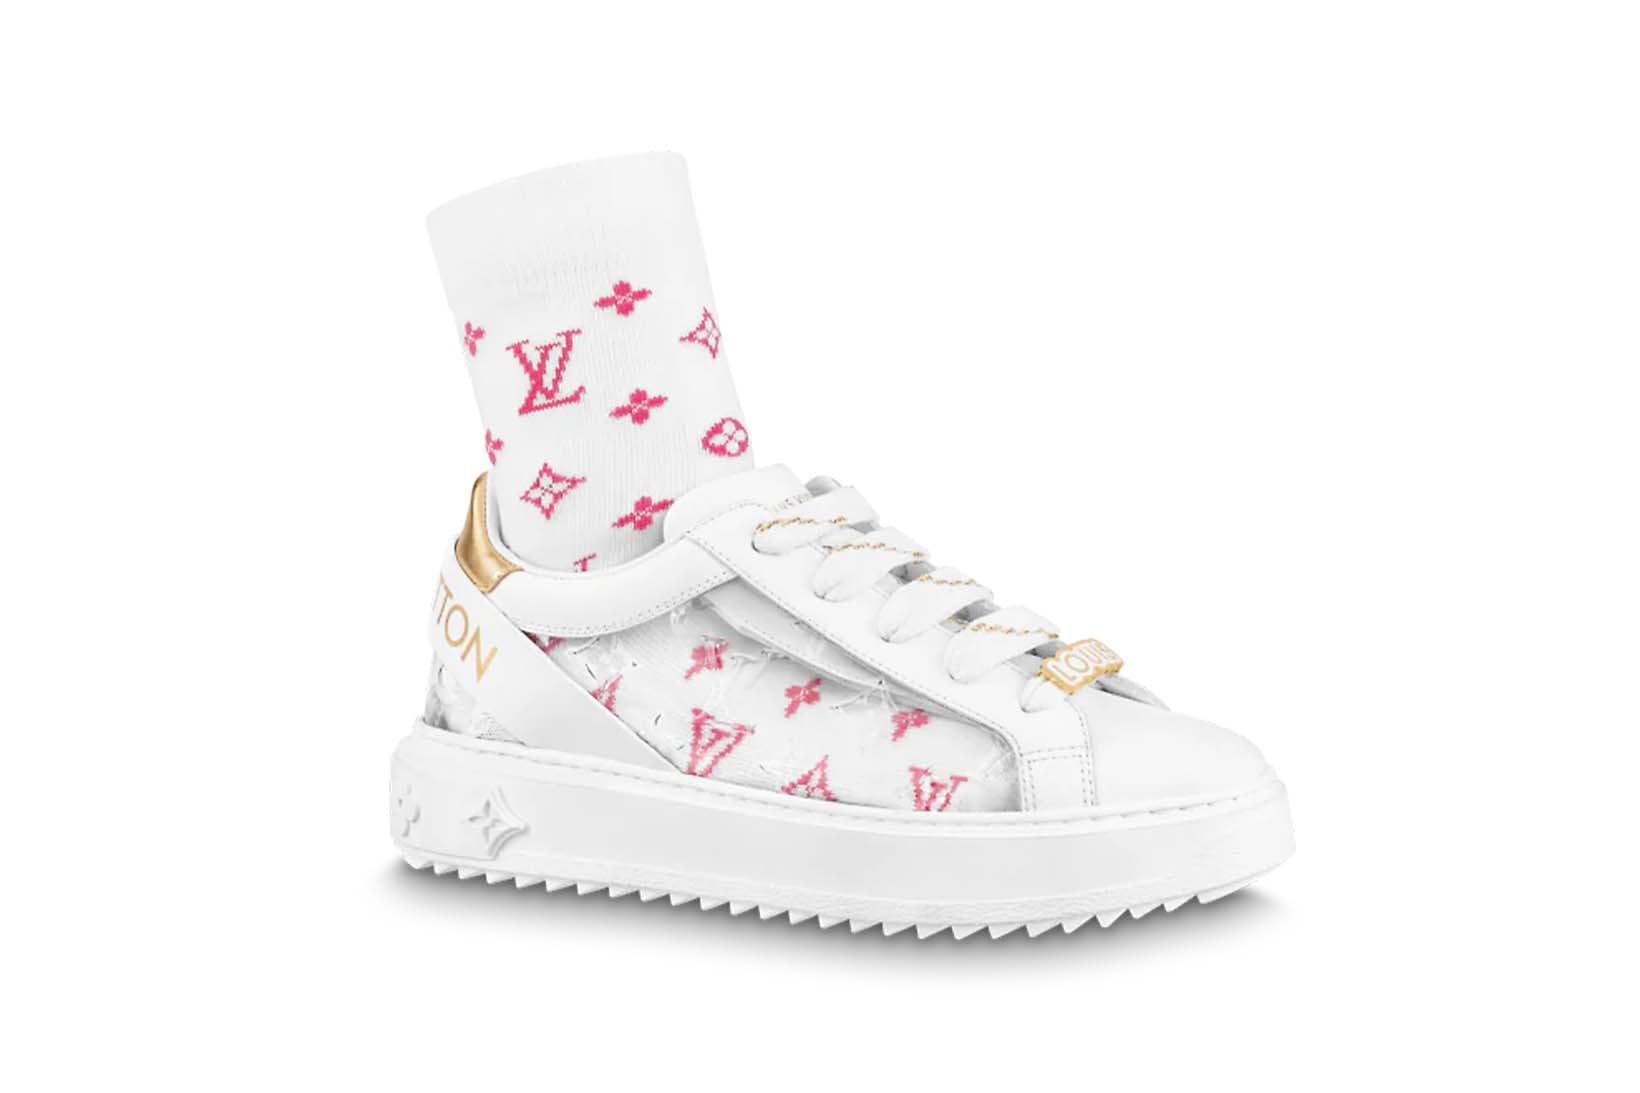 Louis Vuitton Sneaker Time Out Transparent White Pink Gold Socks Price